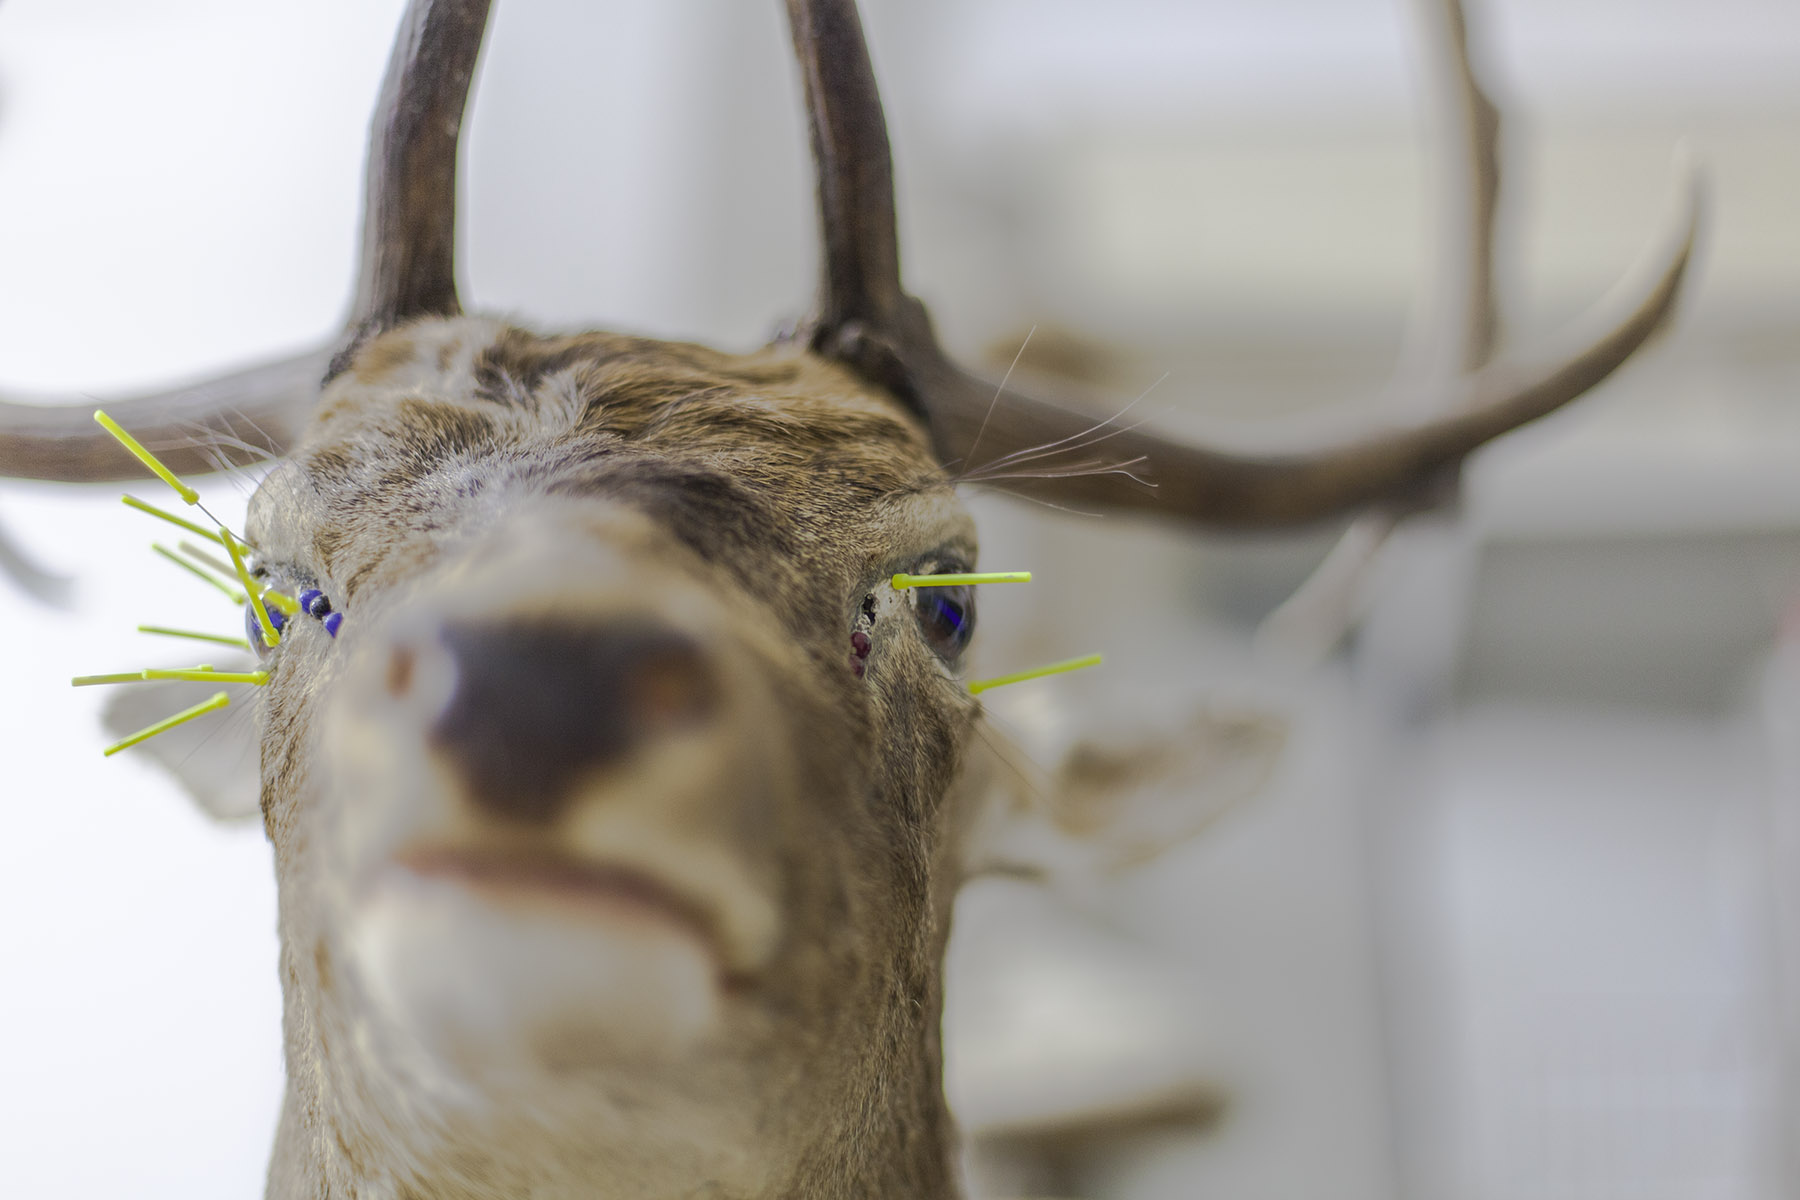 eyes of a deer are fixed with needles